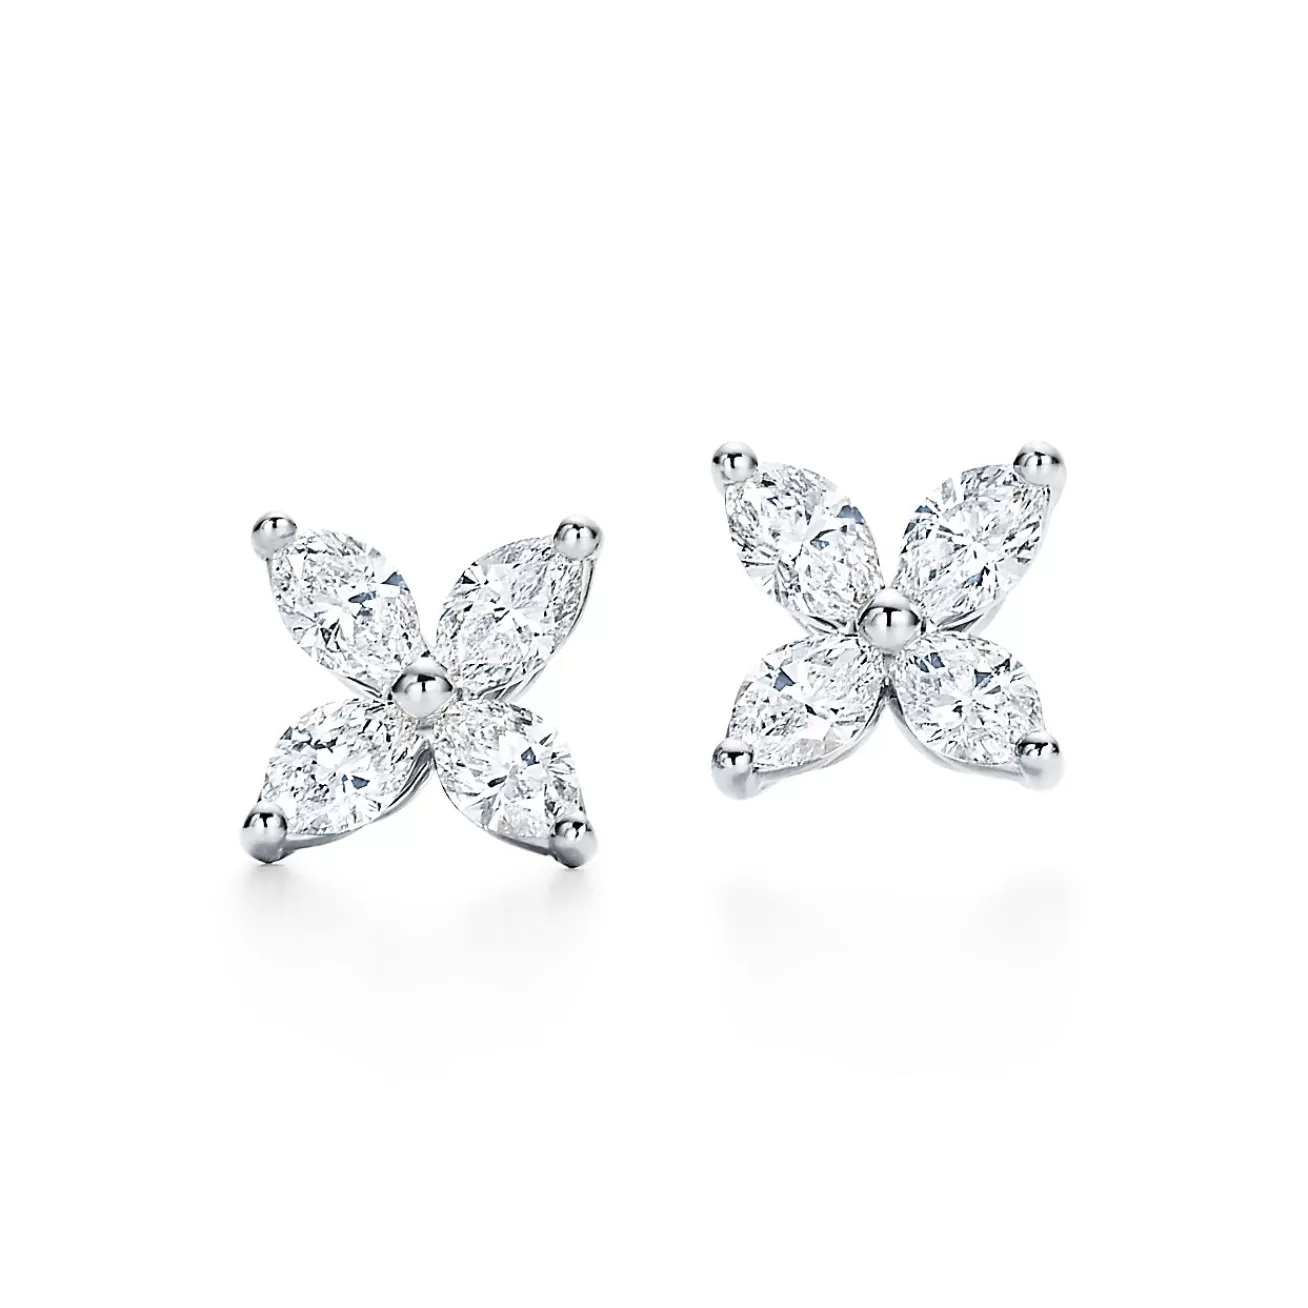 Tiffany & Co. Tiffany Victoria® earrings in platinum with diamonds, small. | ^ Earrings | Gifts for Her